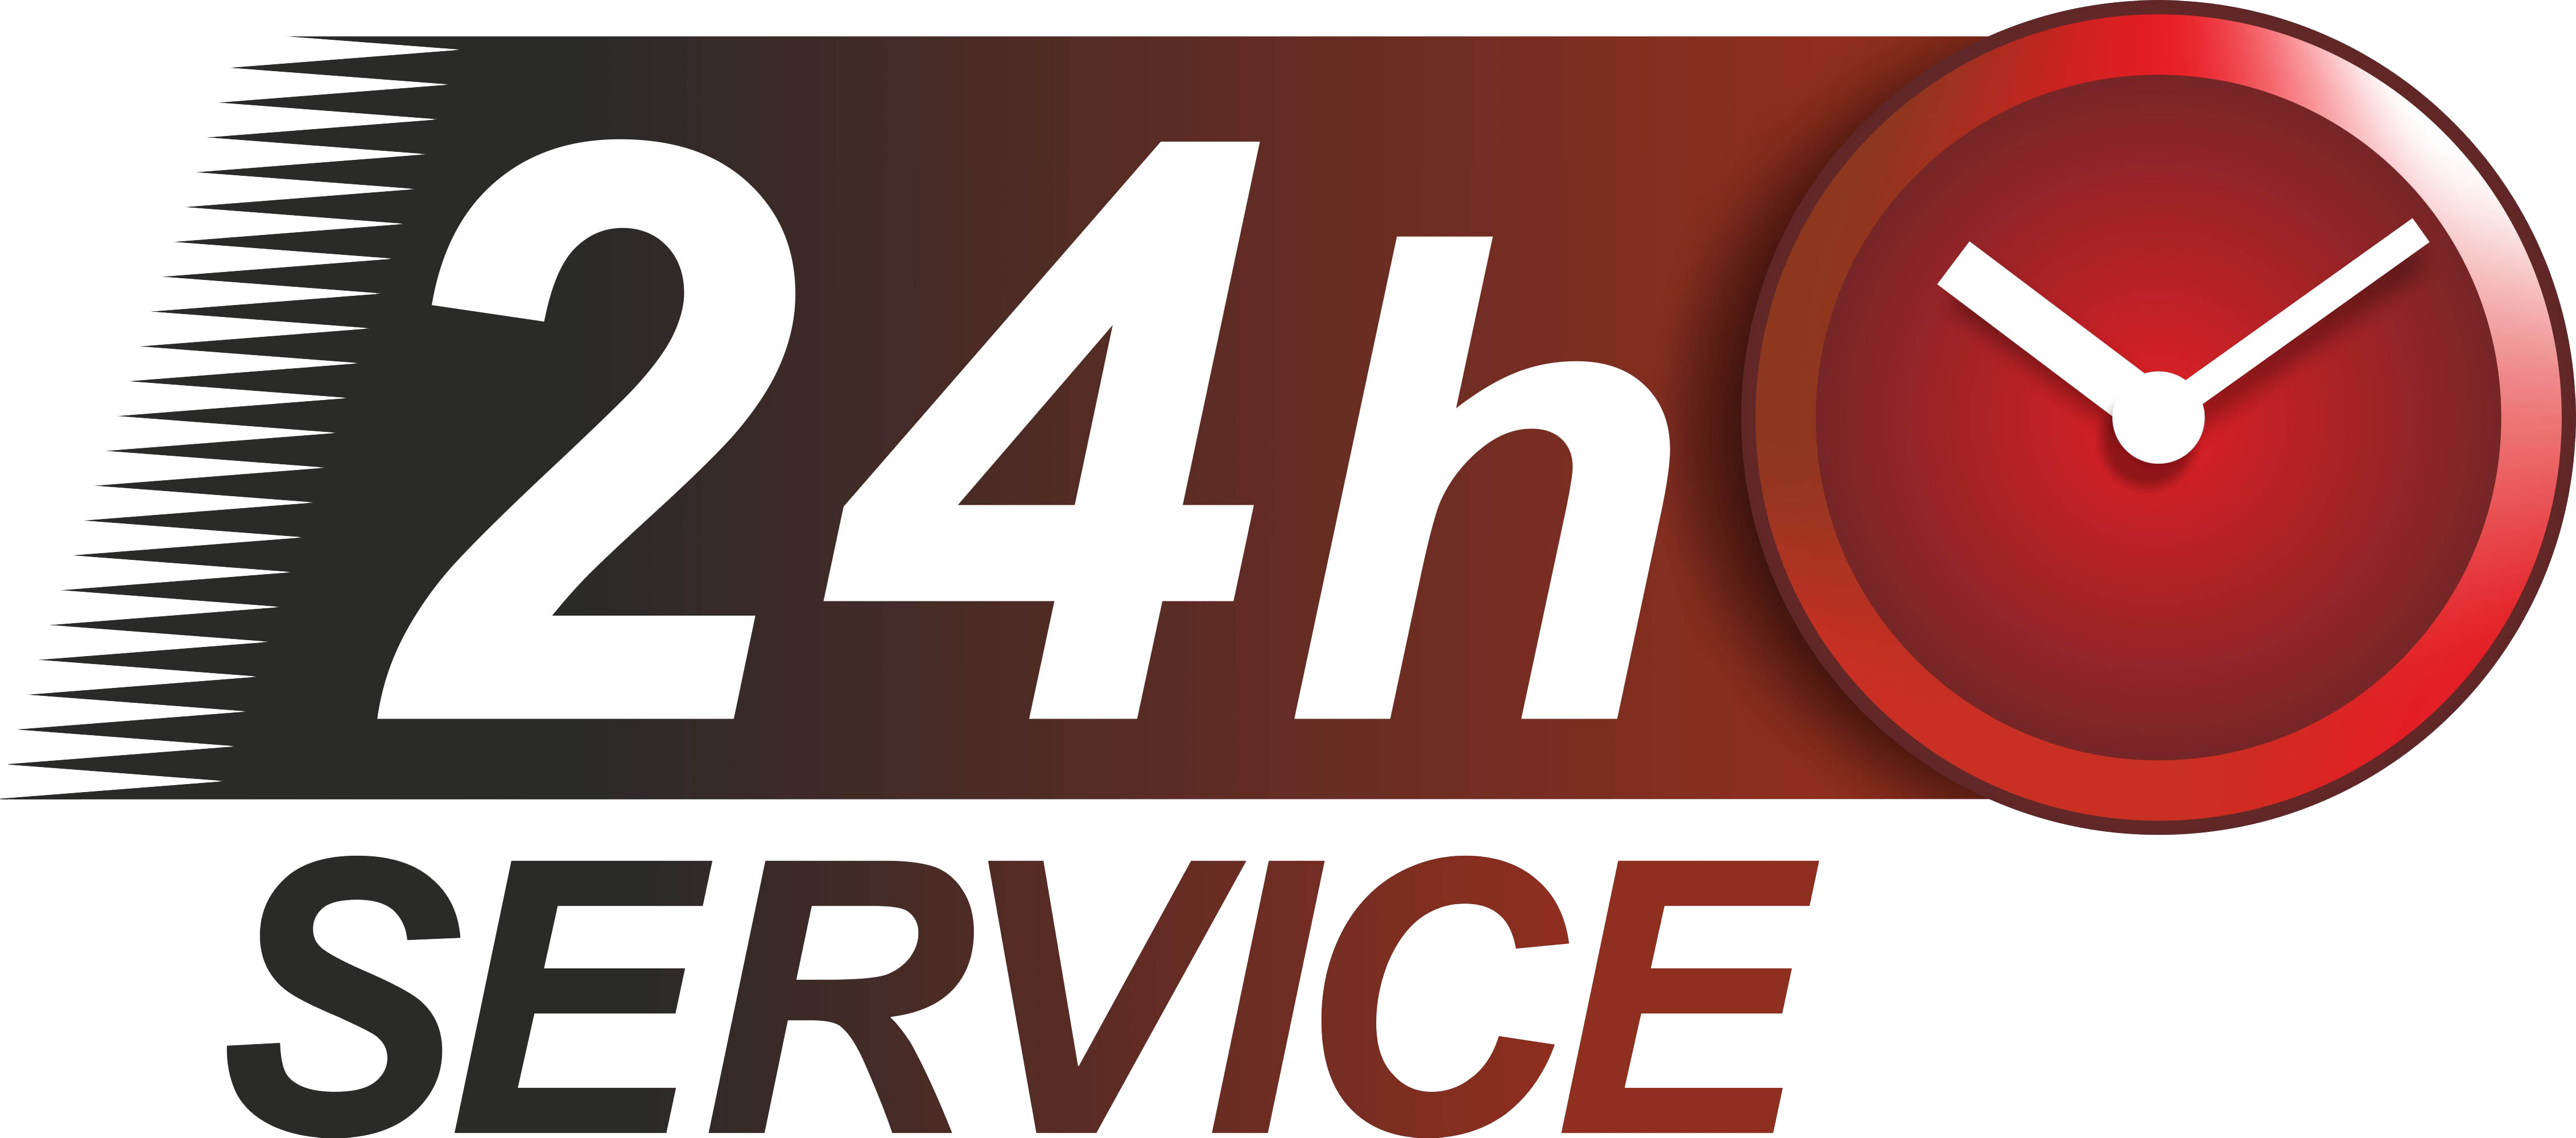 24 hour emergency service available